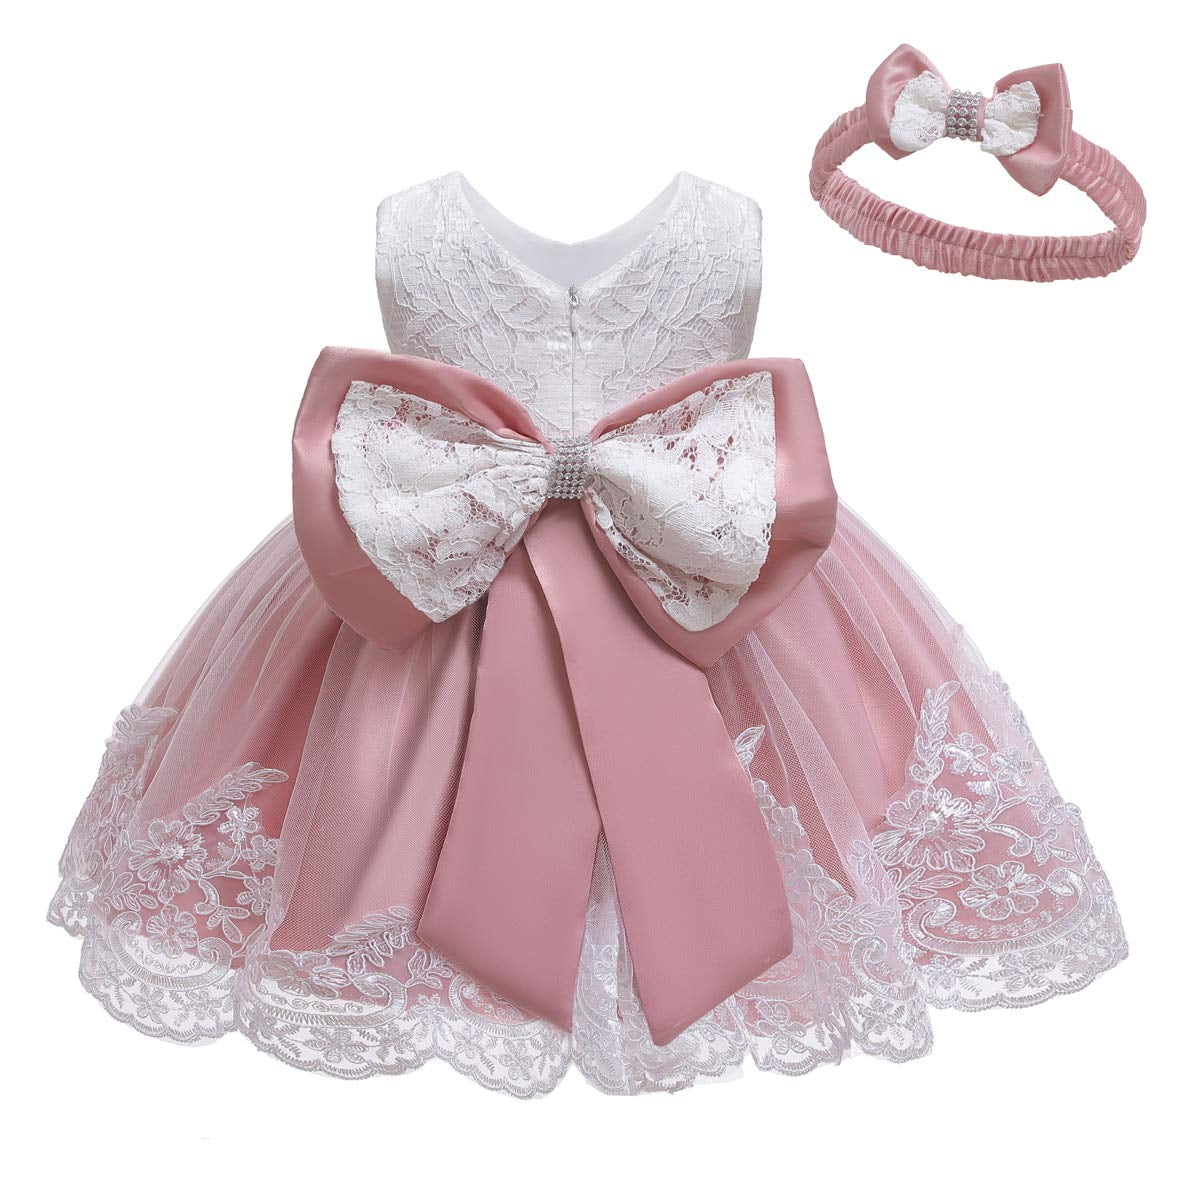 LZH Baby Girls Lace Dress Bowknot Flower Dresses Wedding Pageant Baptism Christening Tutu Gown 0-24 Months